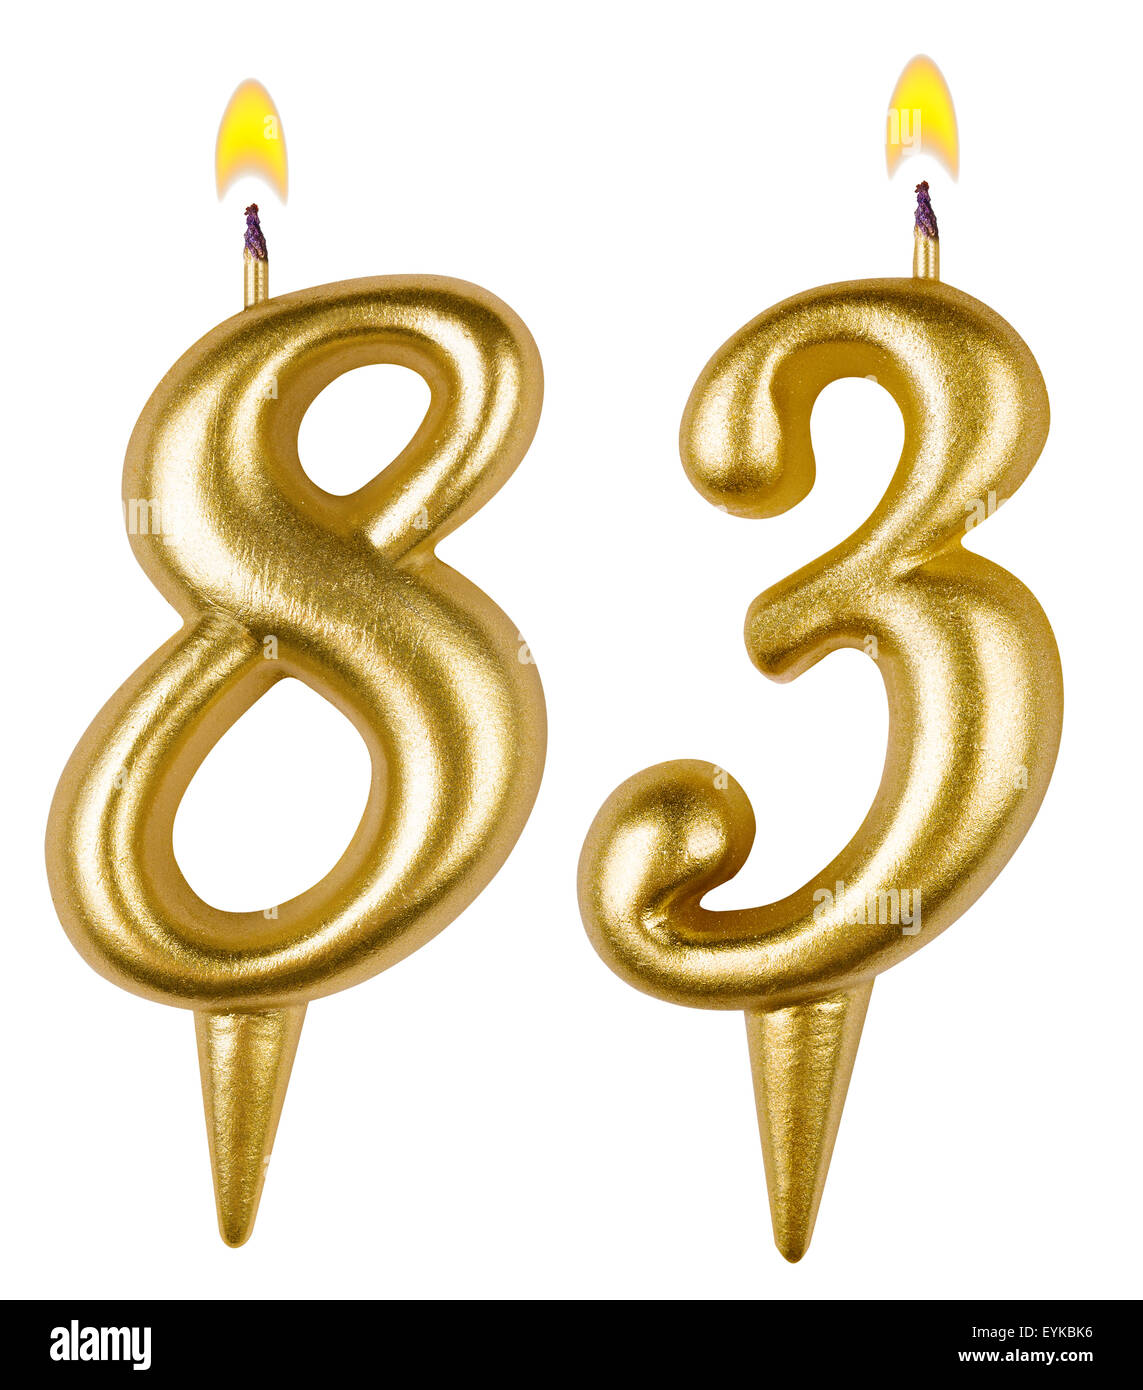 Birthday candles number eighty three isolated on white background Stock Photo